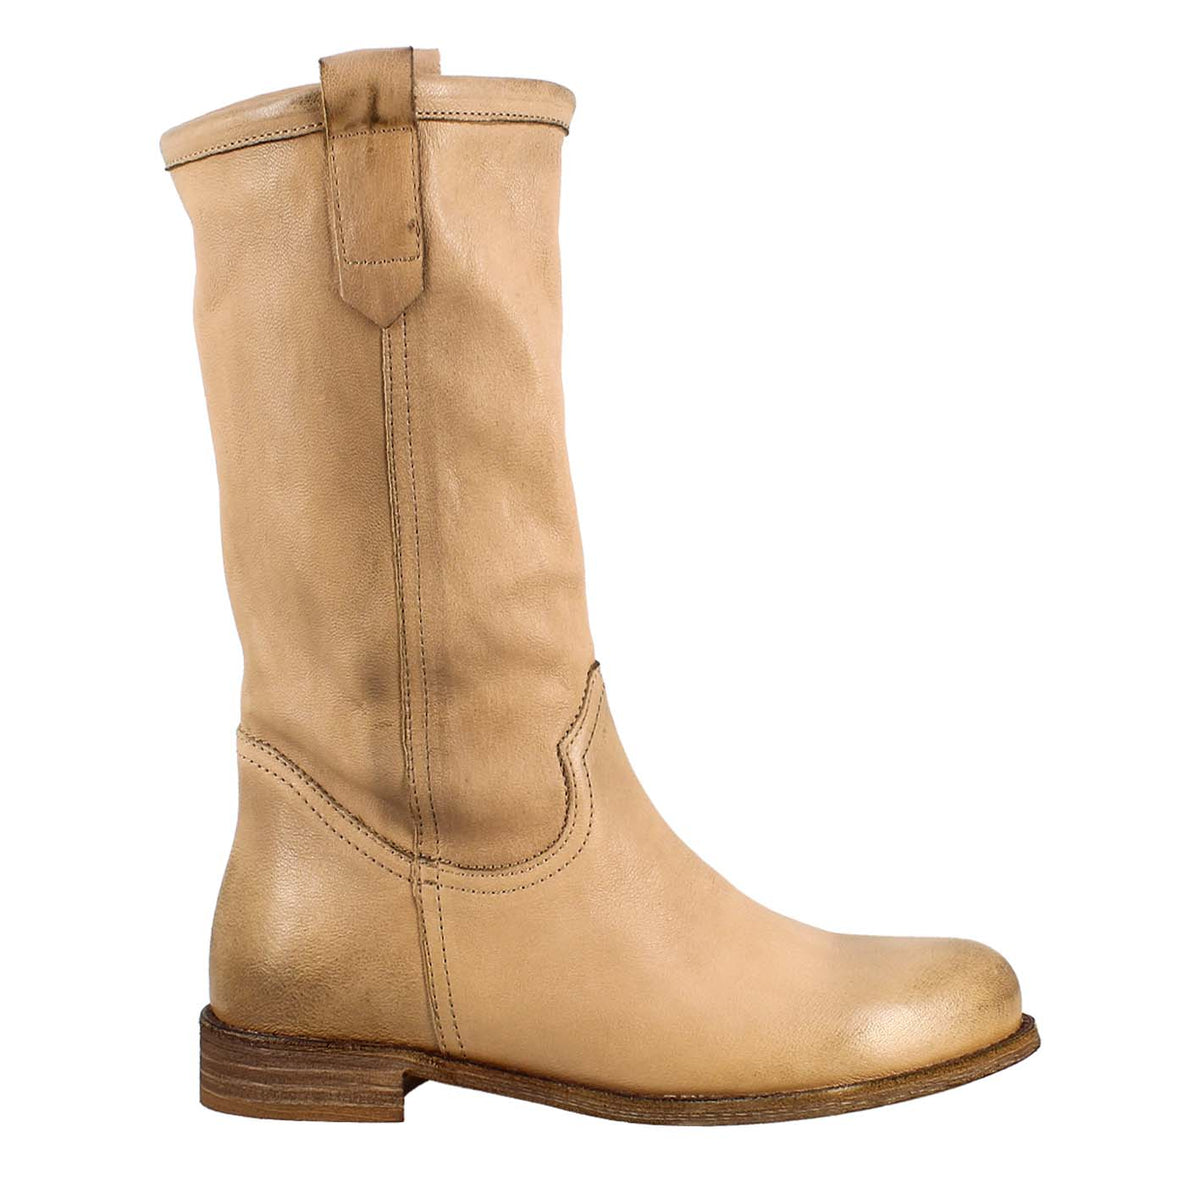 Women's calf-high boot in vintage beige leather, unlined